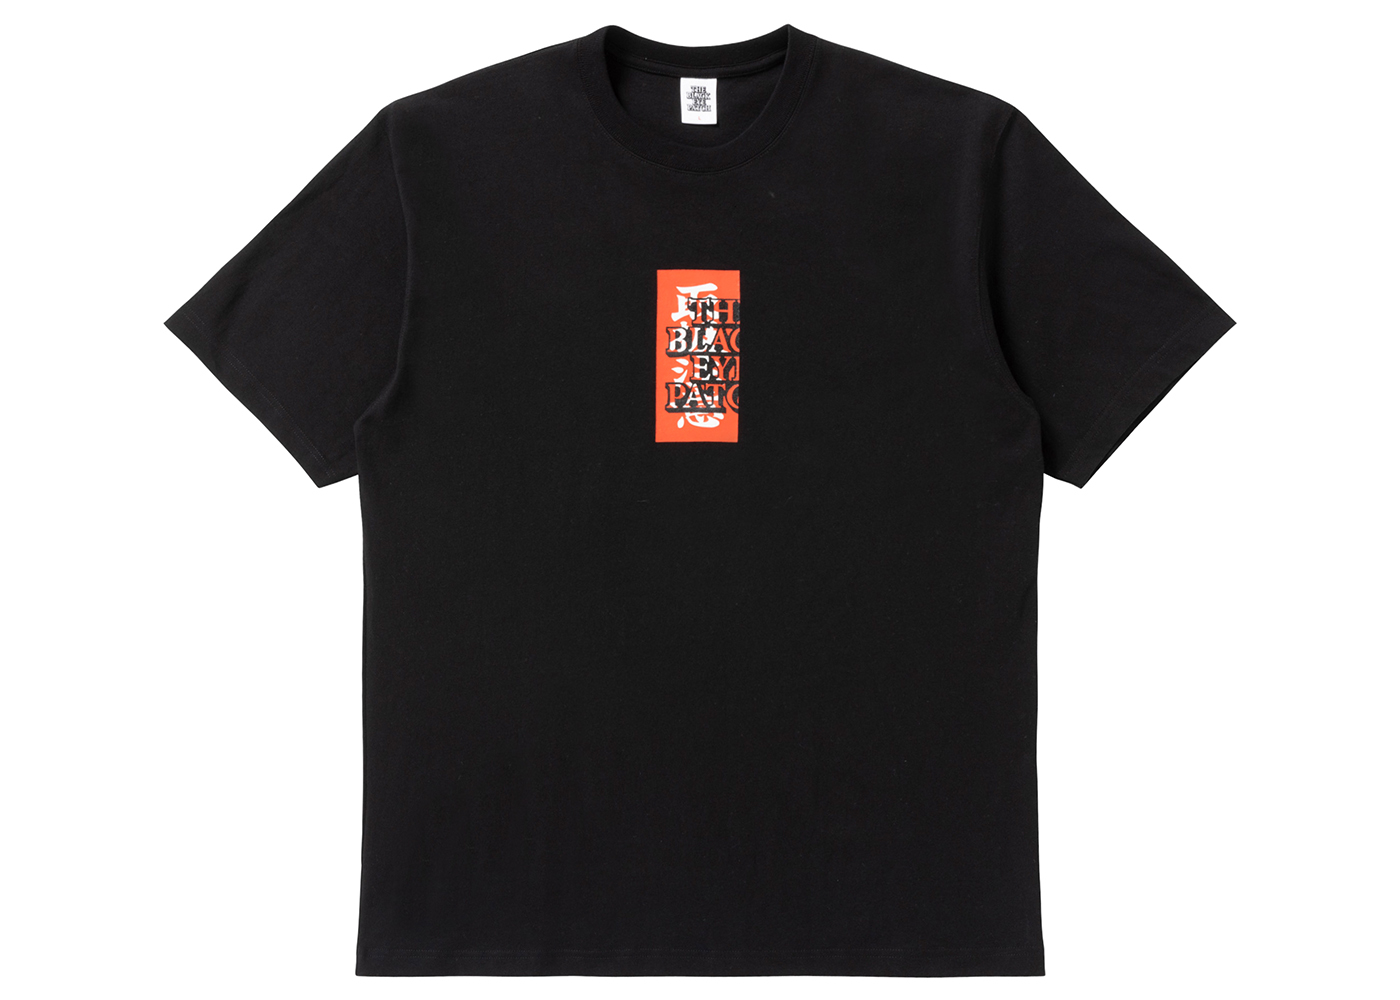 BlackEyePatch Handle with Care Label Tee Black - SS22 - JP